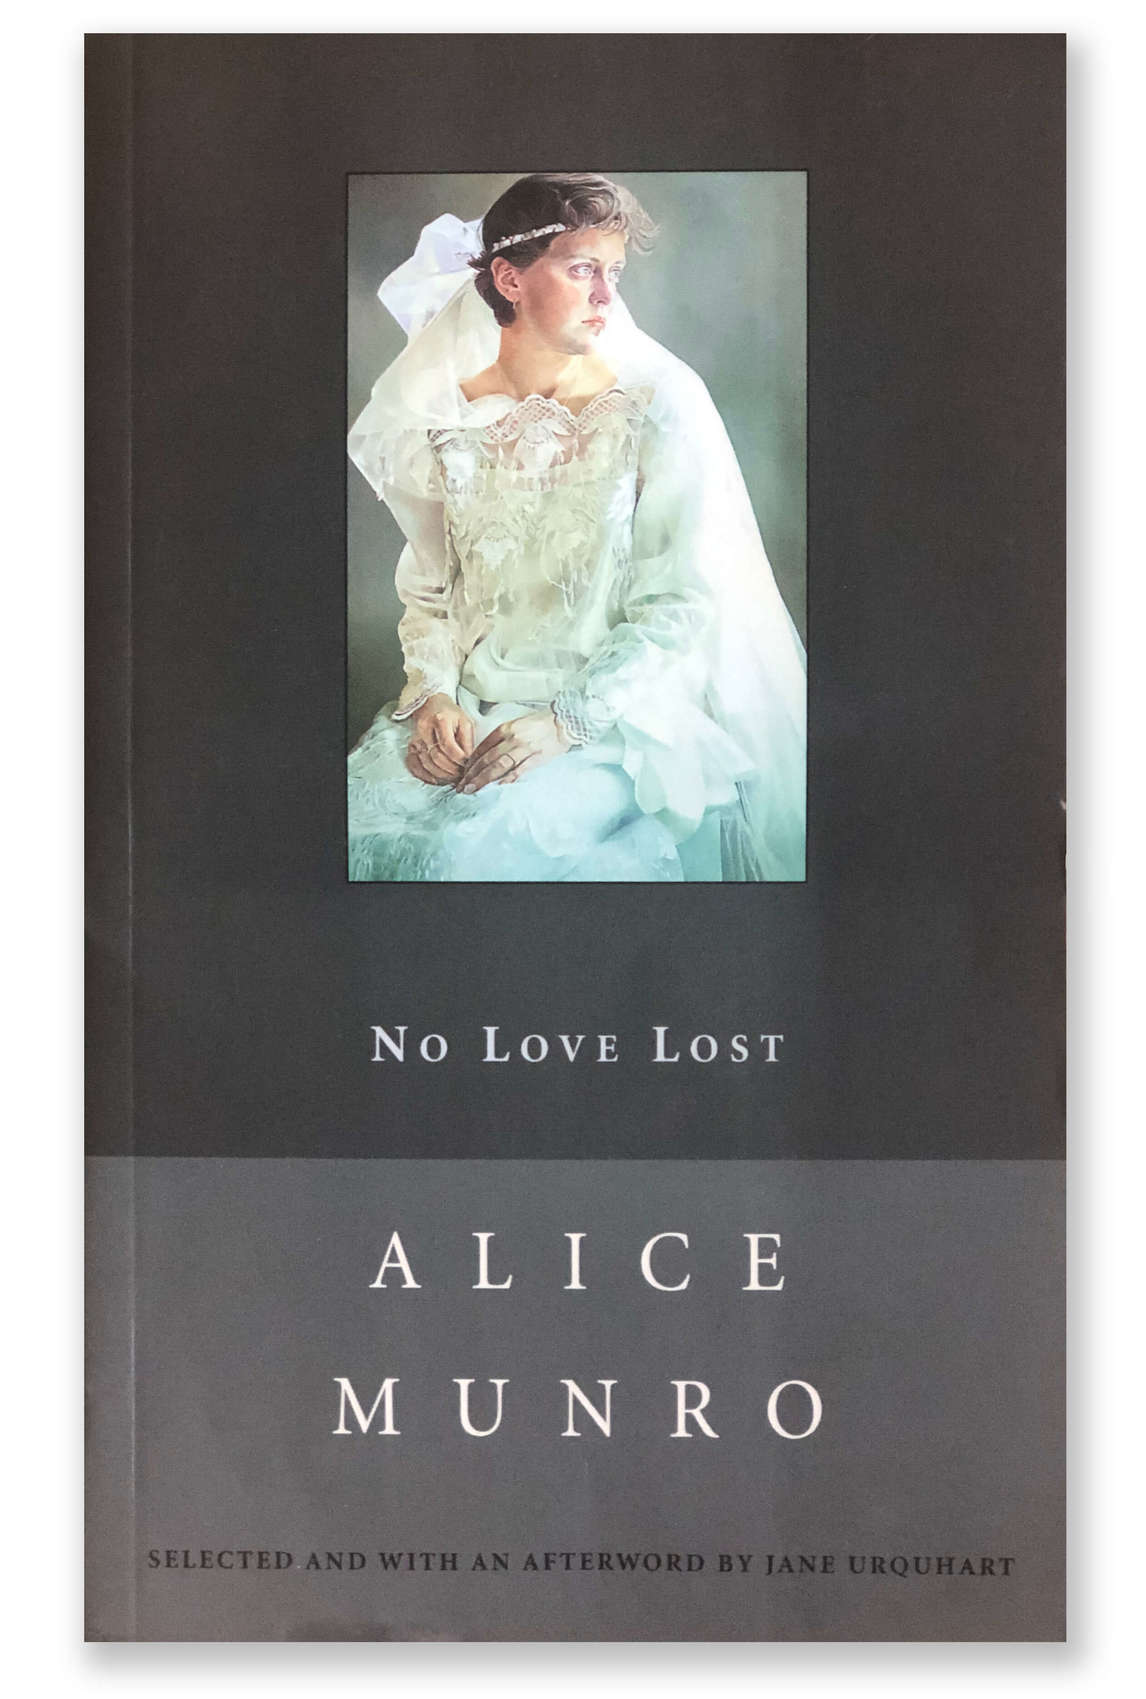 Cover of Alice Munro’s book of short stories No Love Lost, 2003